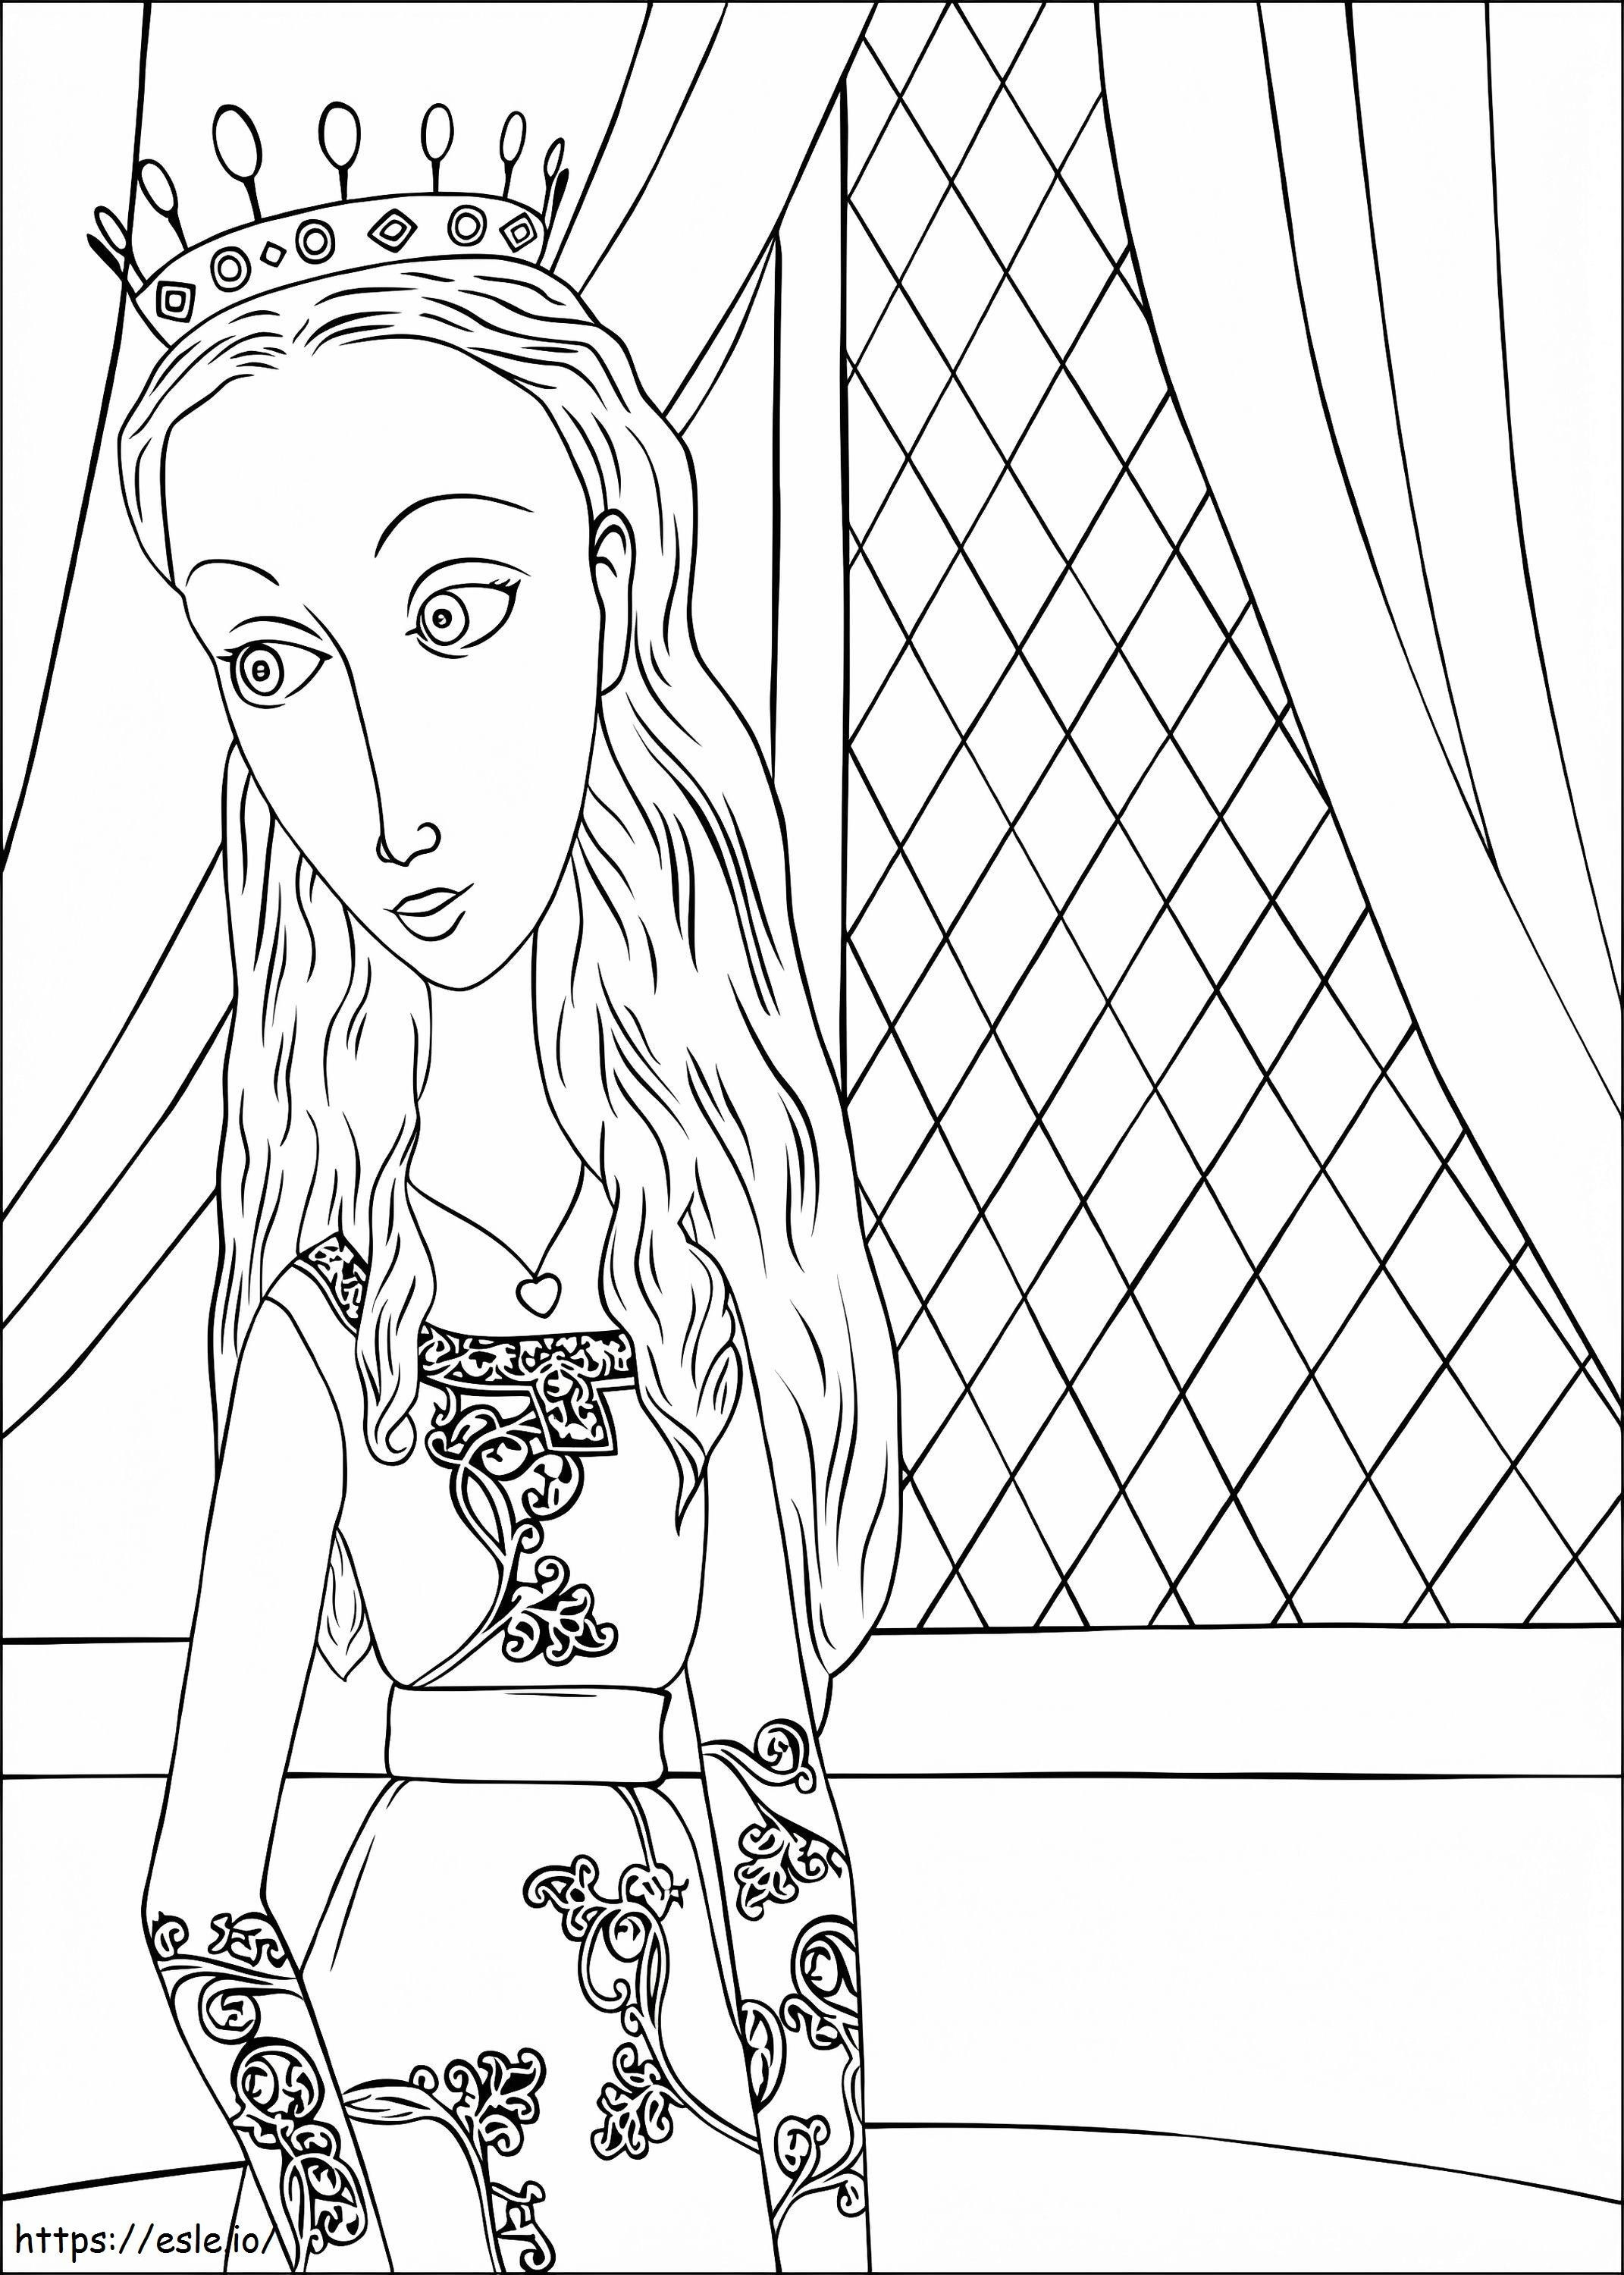 Princess Pea From The Tale Of Despereaux coloring page